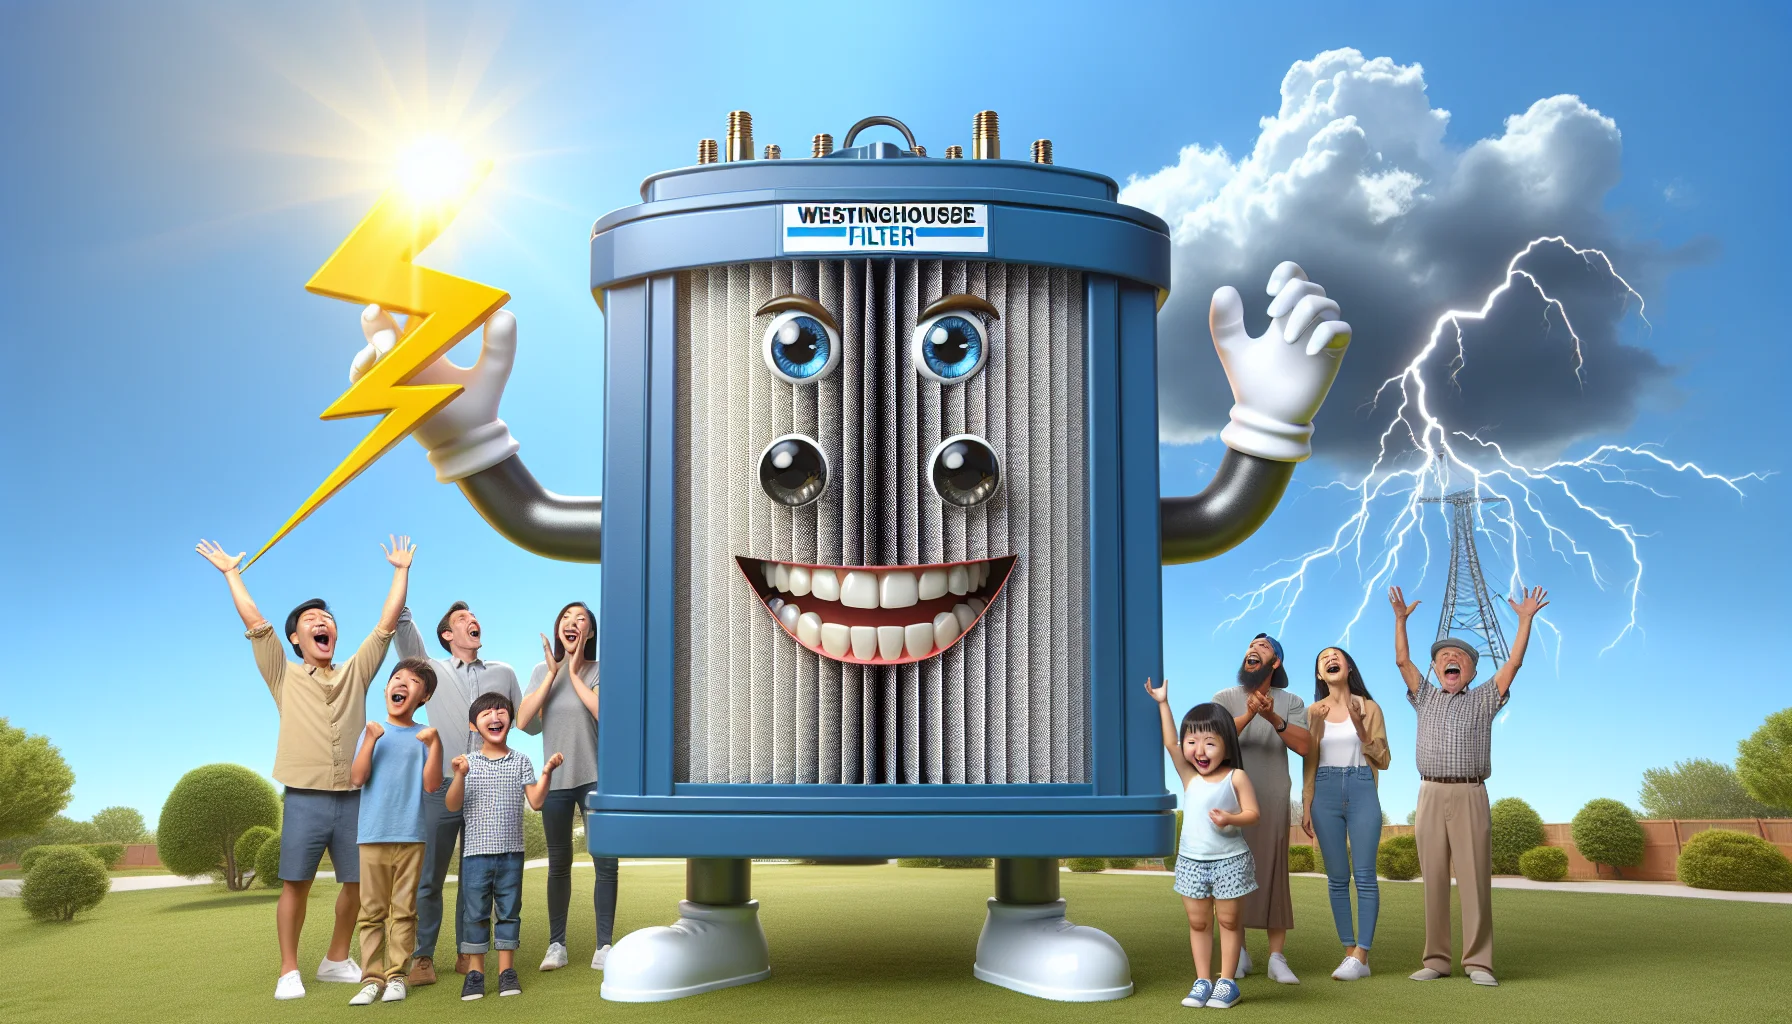 Create a humorous and realistic image displaying a Westinghouse Filter. In this scenario, the filter seems to be cheerfully dressed up with eyes,shiny teeth and hands. The location is an outdoor setting with pristine blue sky in the background. Beside the filter, there is a giant lightning bolt from the sky, suggesting the power it holds. Around the filter, a diverse group of people consisting of an Asian man, a Caucasian woman, a Middle Eastern child, and a Black elderly, are in awe and laughing, indicating the filter's ability to generate electricity.